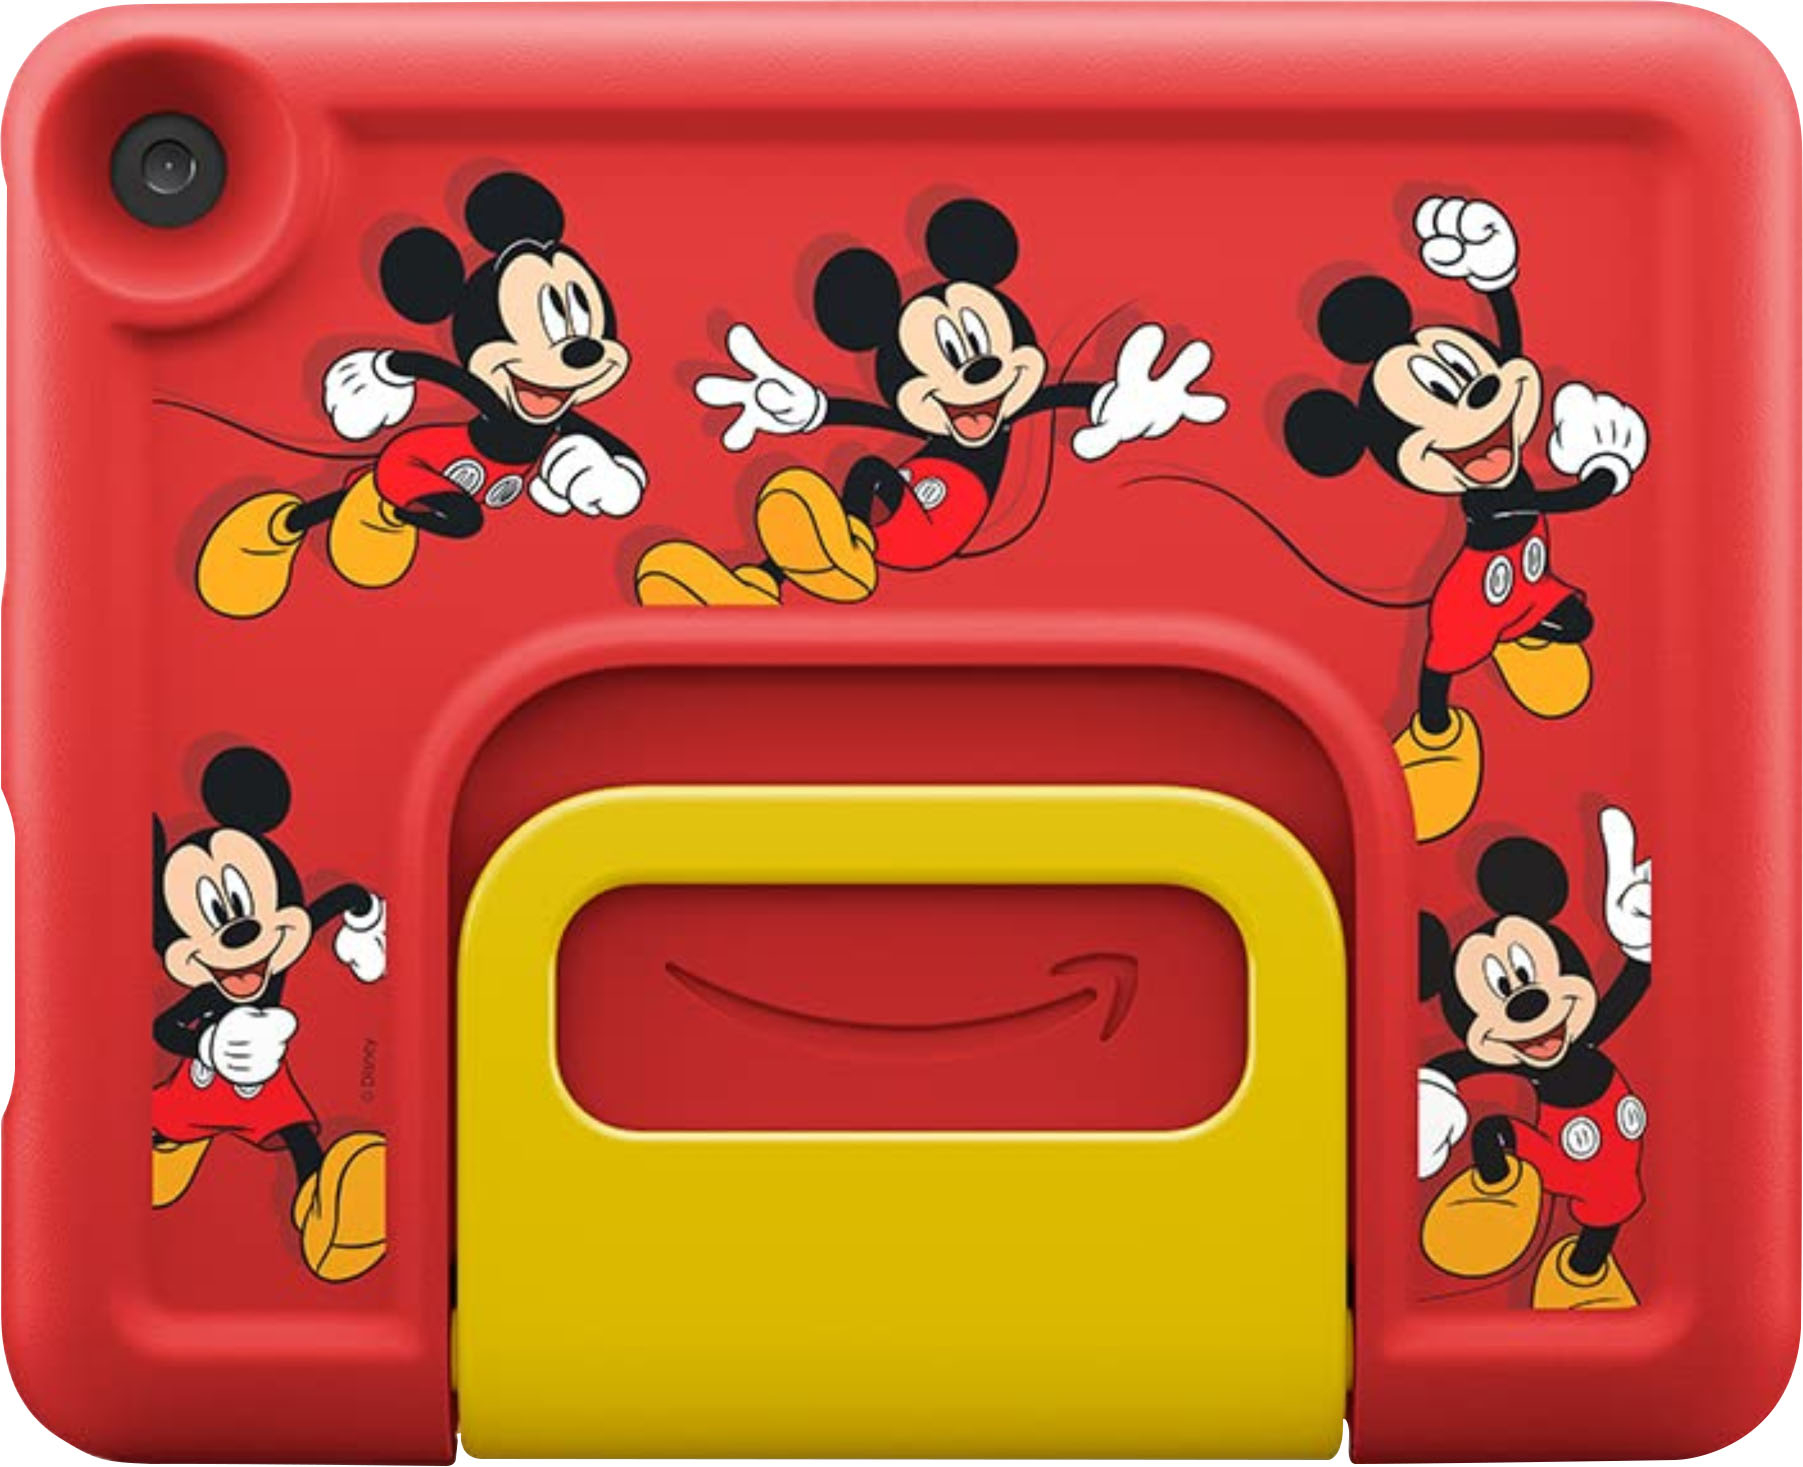  Fire HD 8 Kids – Ages 3-7 (2022) 8 HD Tablet 32 GB with Wi-Fi - Disney Mickey Mouse - Disney Mickey Mouse